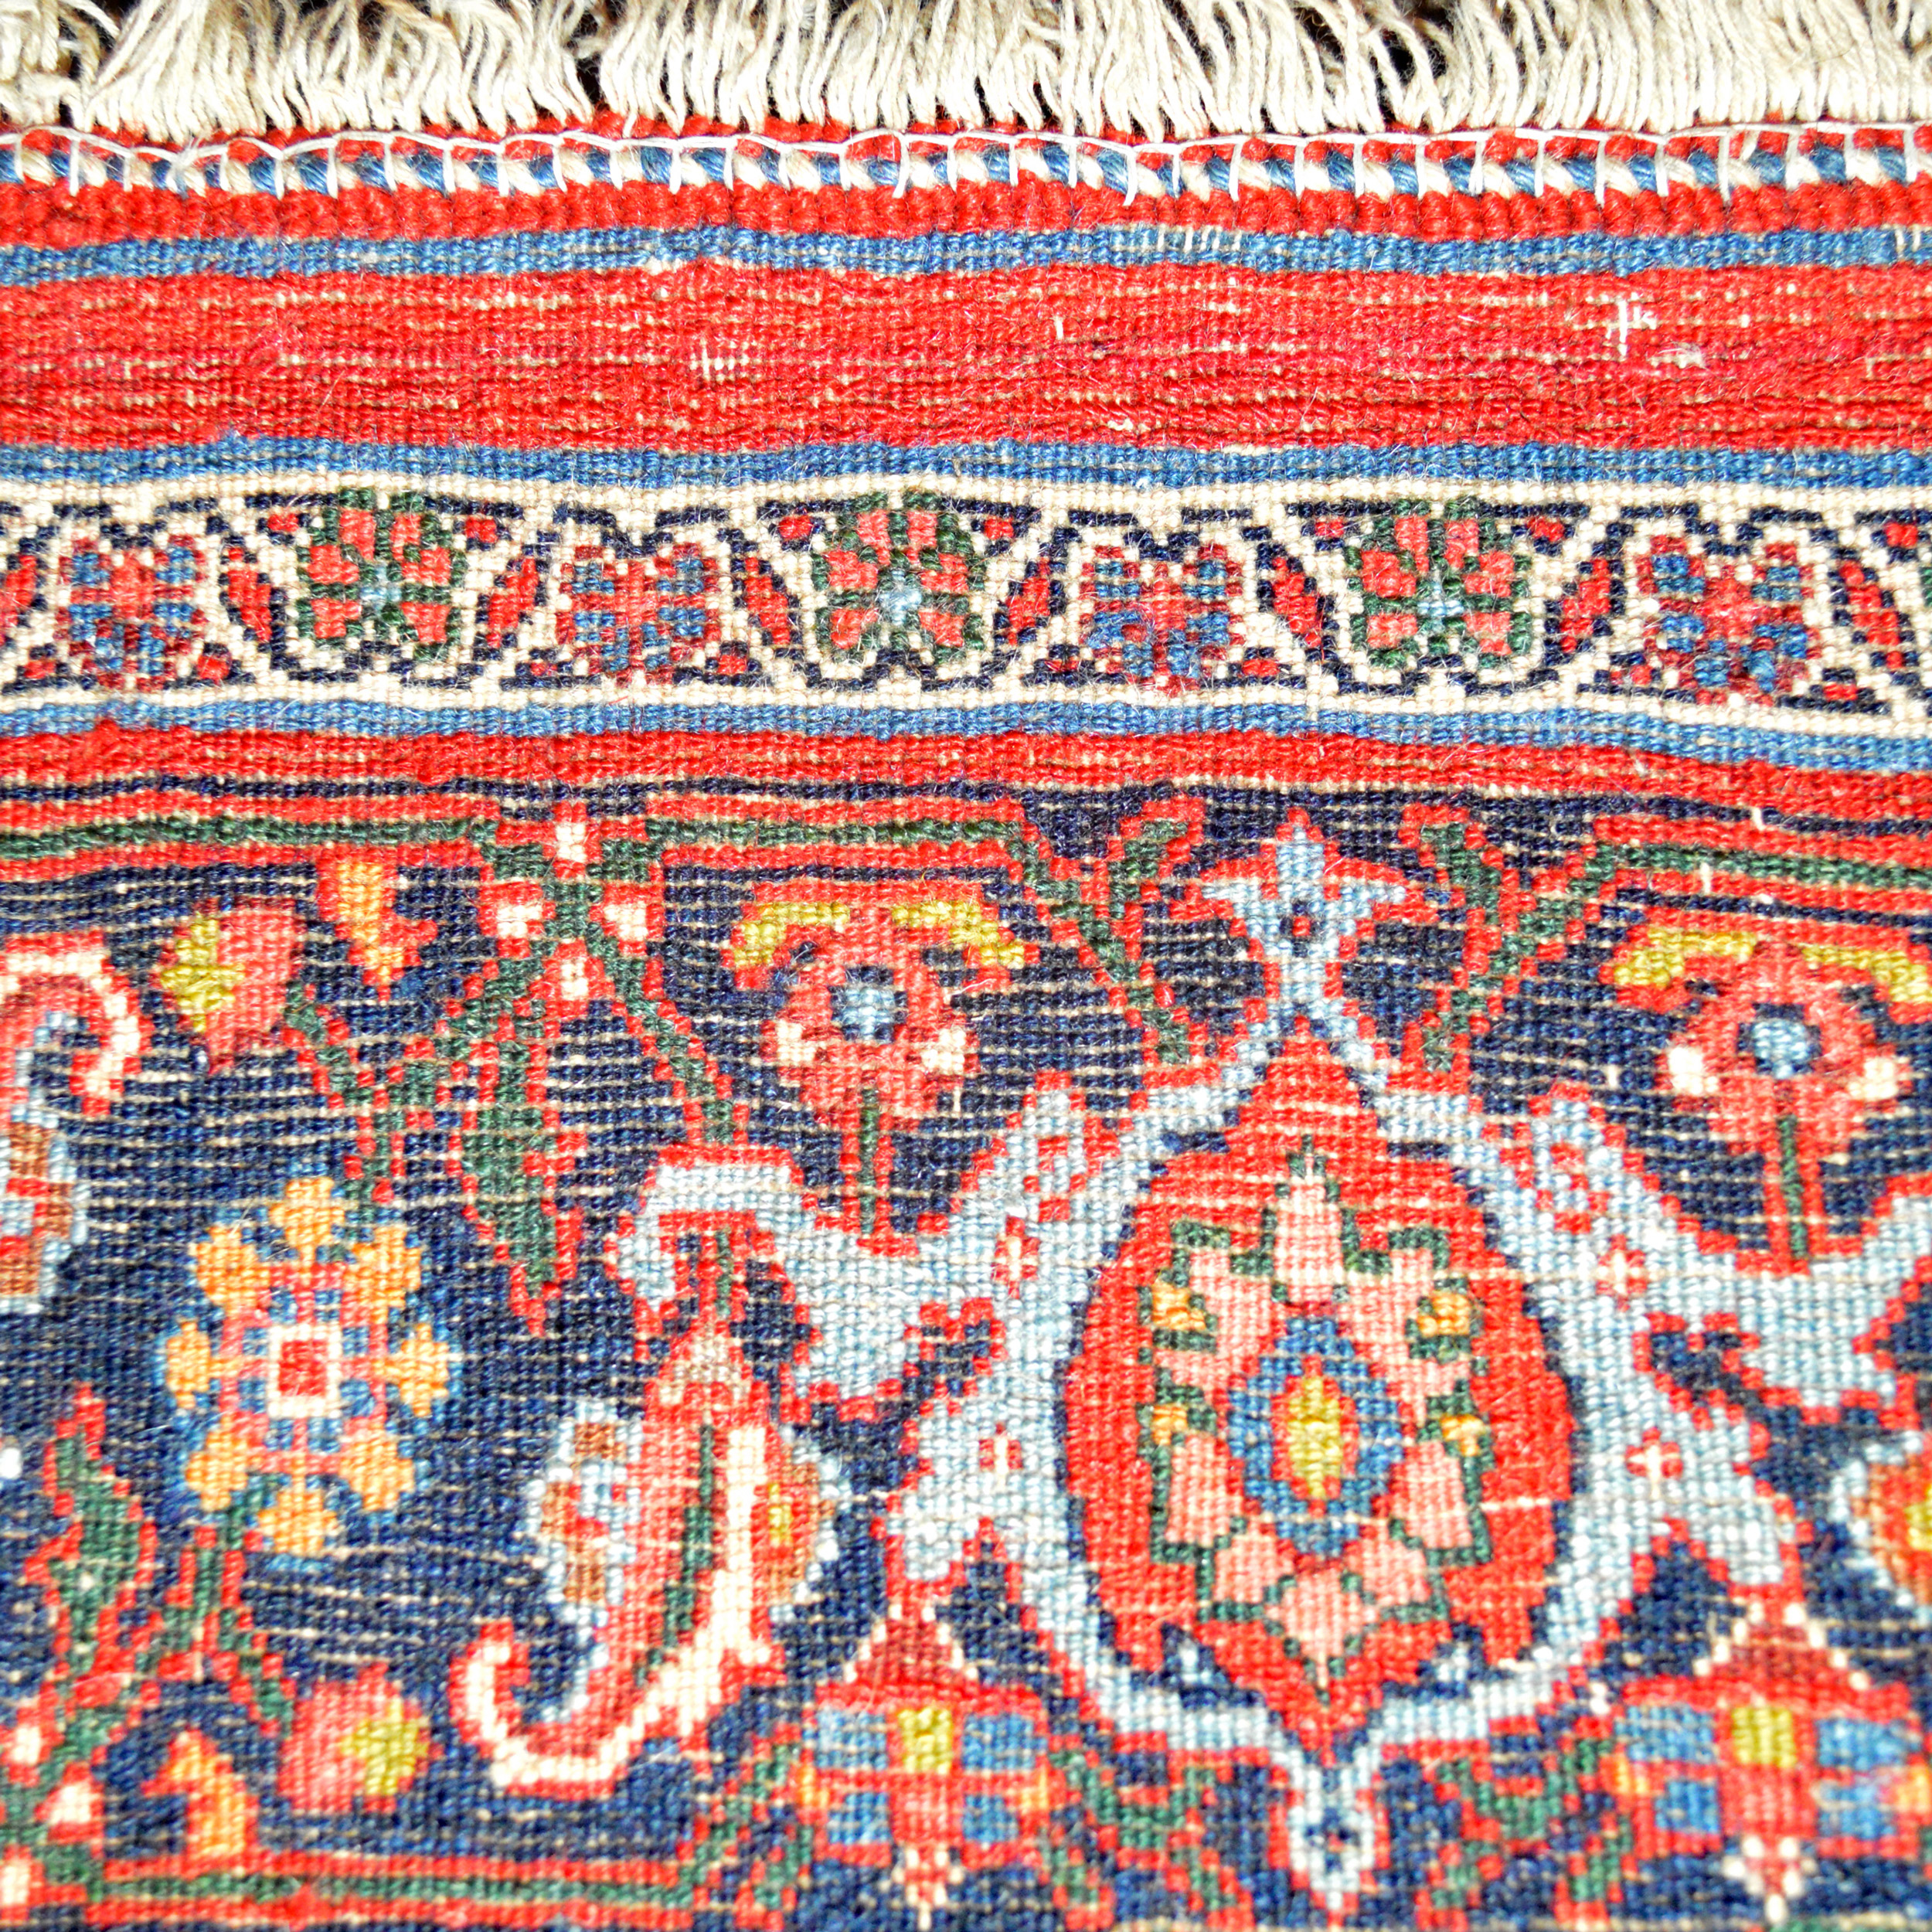 Weave detail from a finely woven antique Persian Halvai Bidjar rug with a red, Herati design field and a navy blue Turtle border, circa 1920, northwest Persia - Douglas Stock Gallery, antique Persian rugs Boston,MA area, antique rugs New England